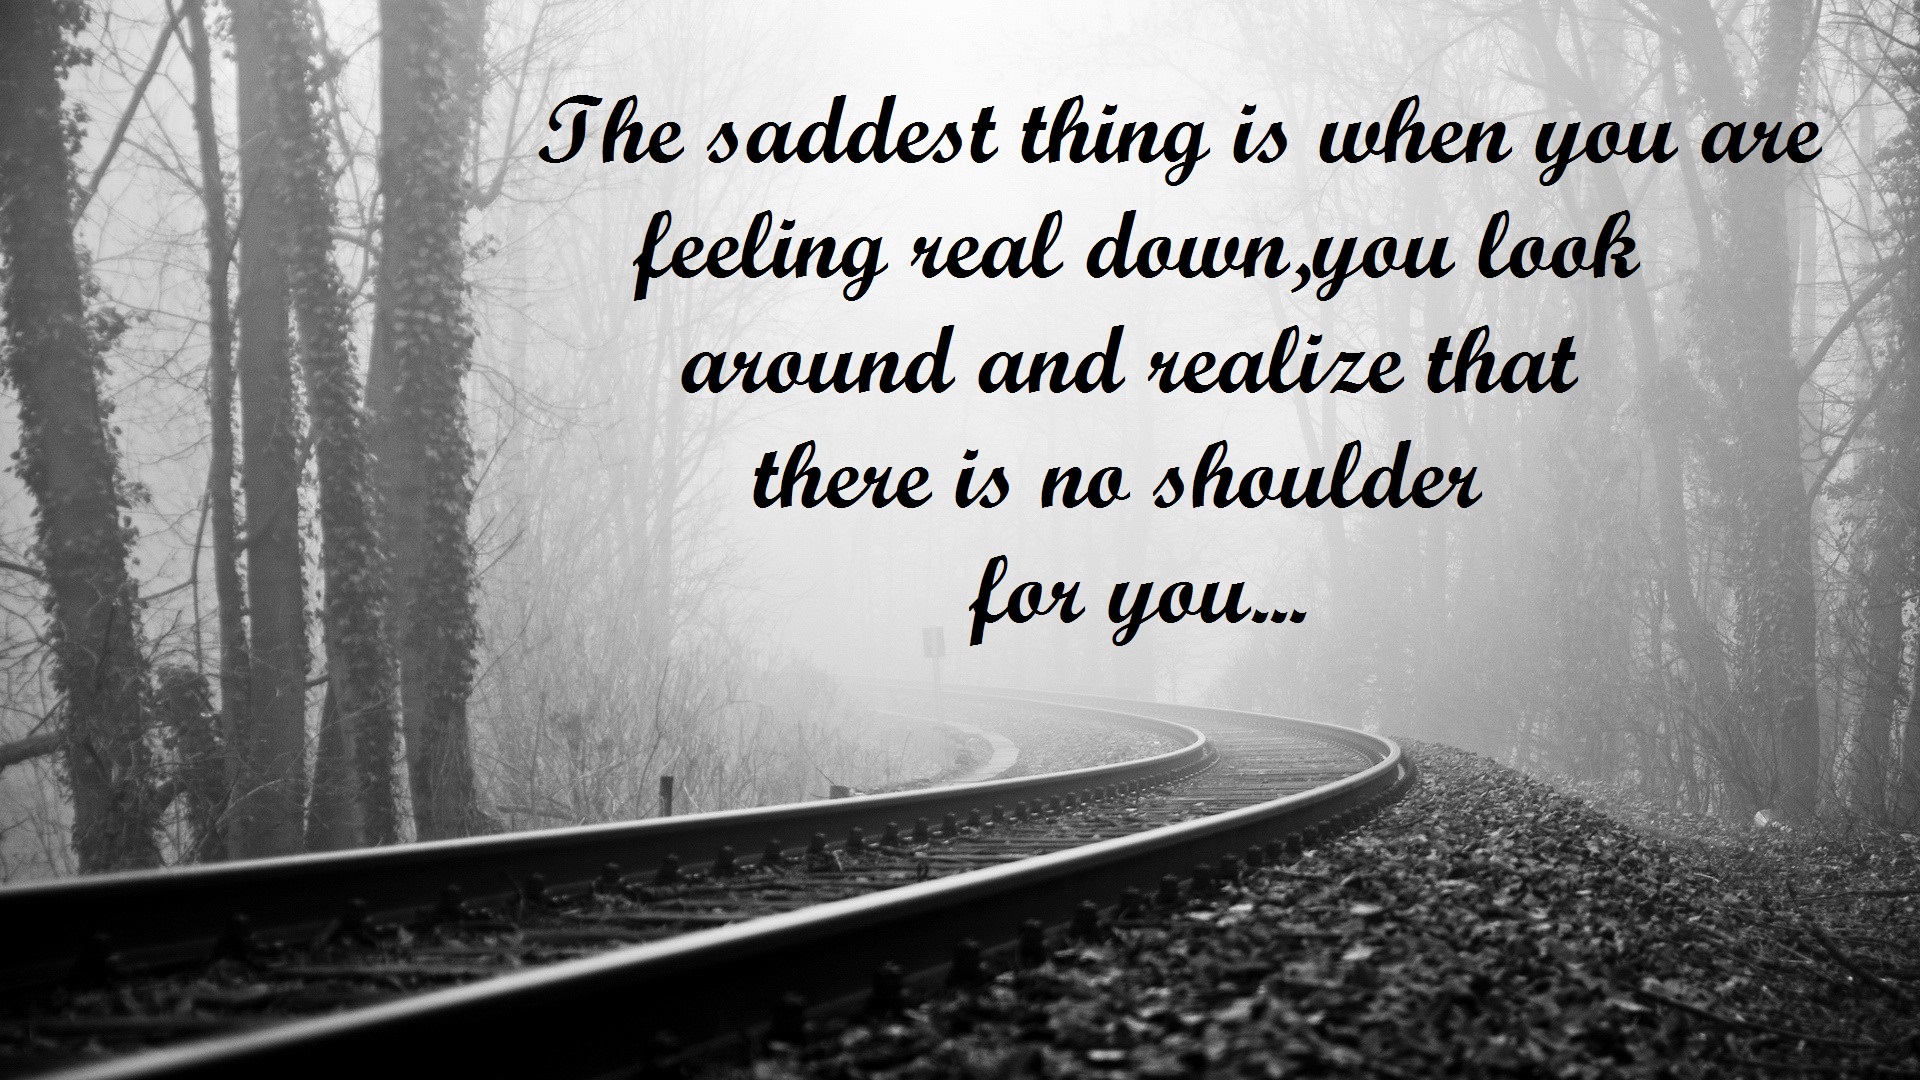 Heart Touching Sad Life Quotes Images & Pictures